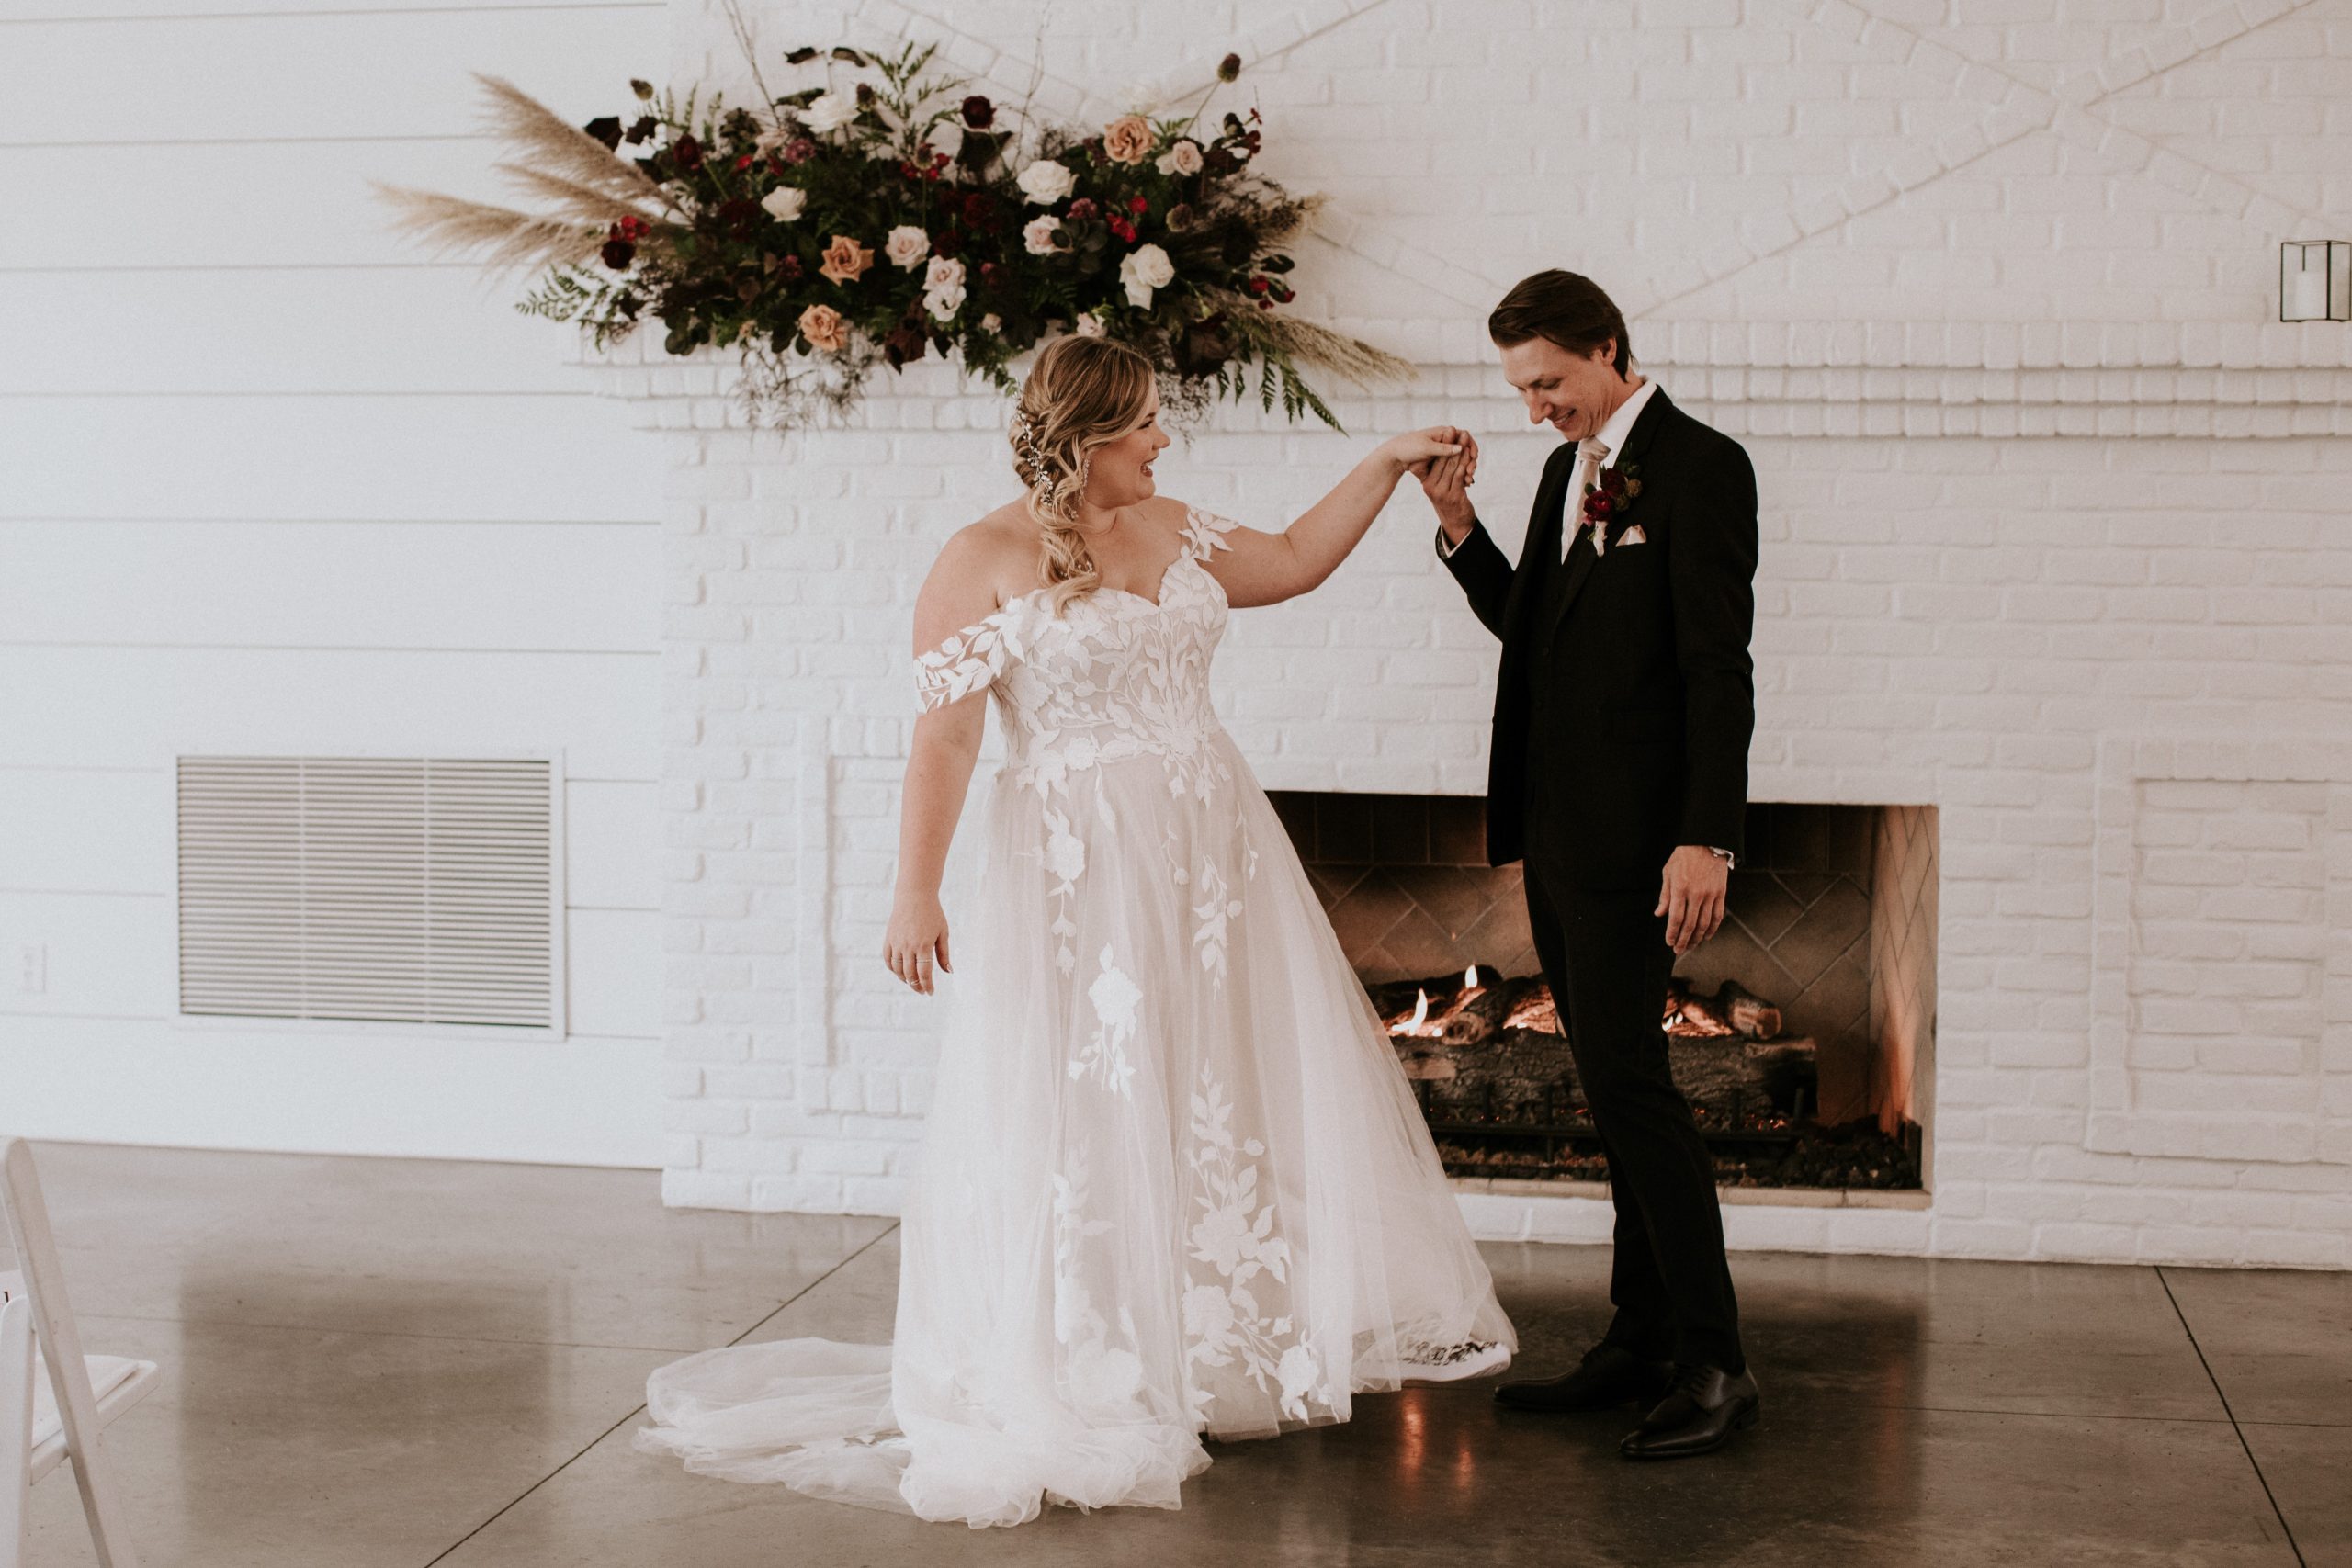 Bride In Modern A-Line Wedding Dress Called Hattie Lane Lynette By Rebecca Ingram With Groom In White Room With Flowers